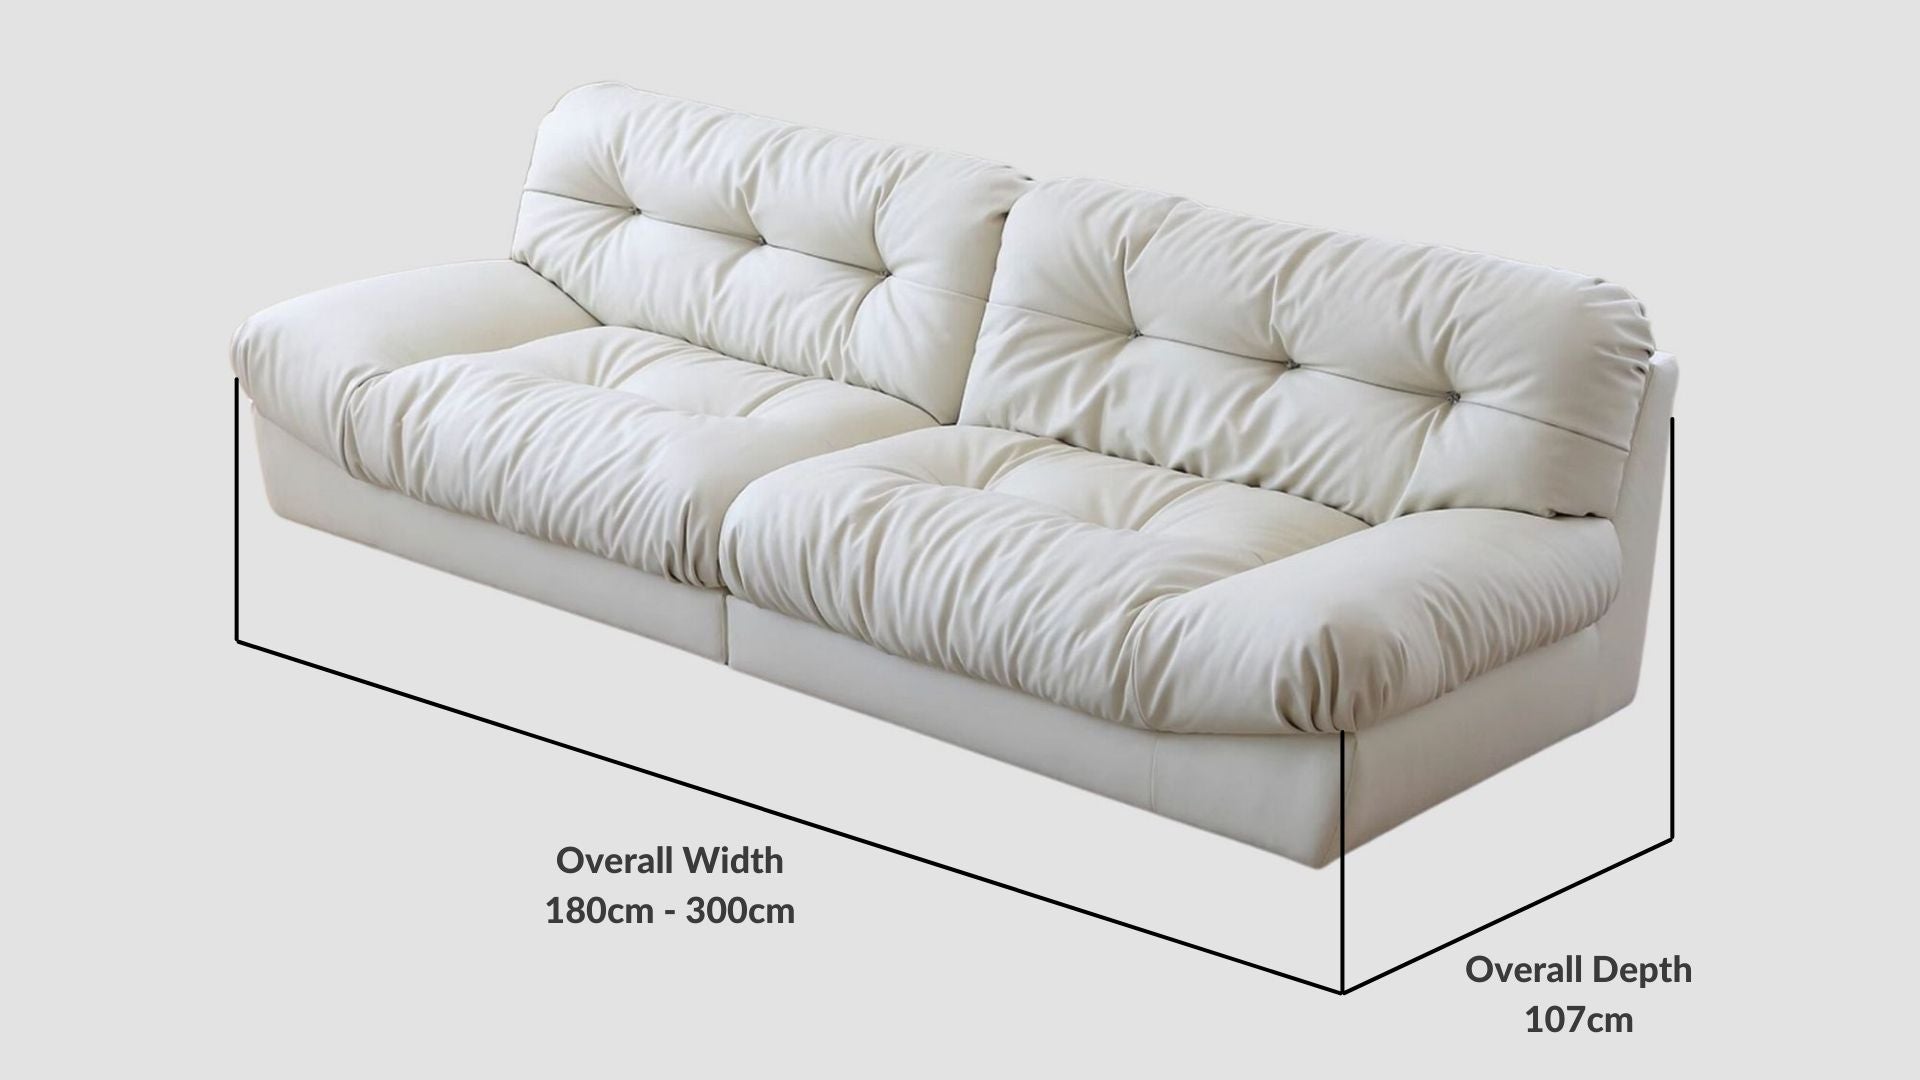 Details the key dimensions in terms of overall width, overall depth and seat width for Clora Half Leather Sofa